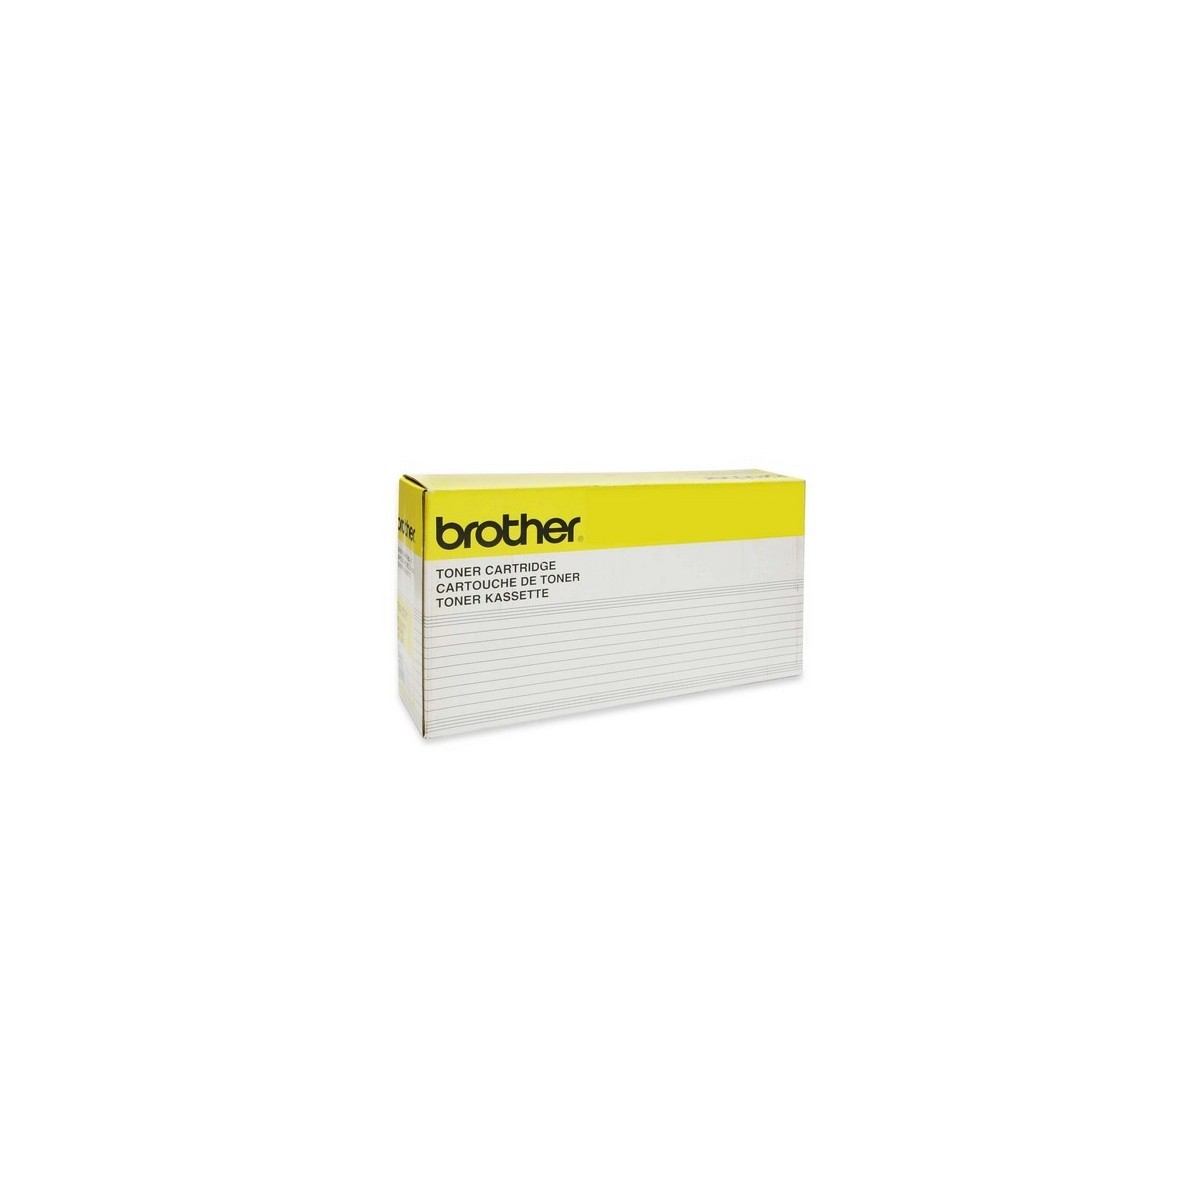 Brother TN02Y - 8500 pages - Yellow - 1 pc(s)